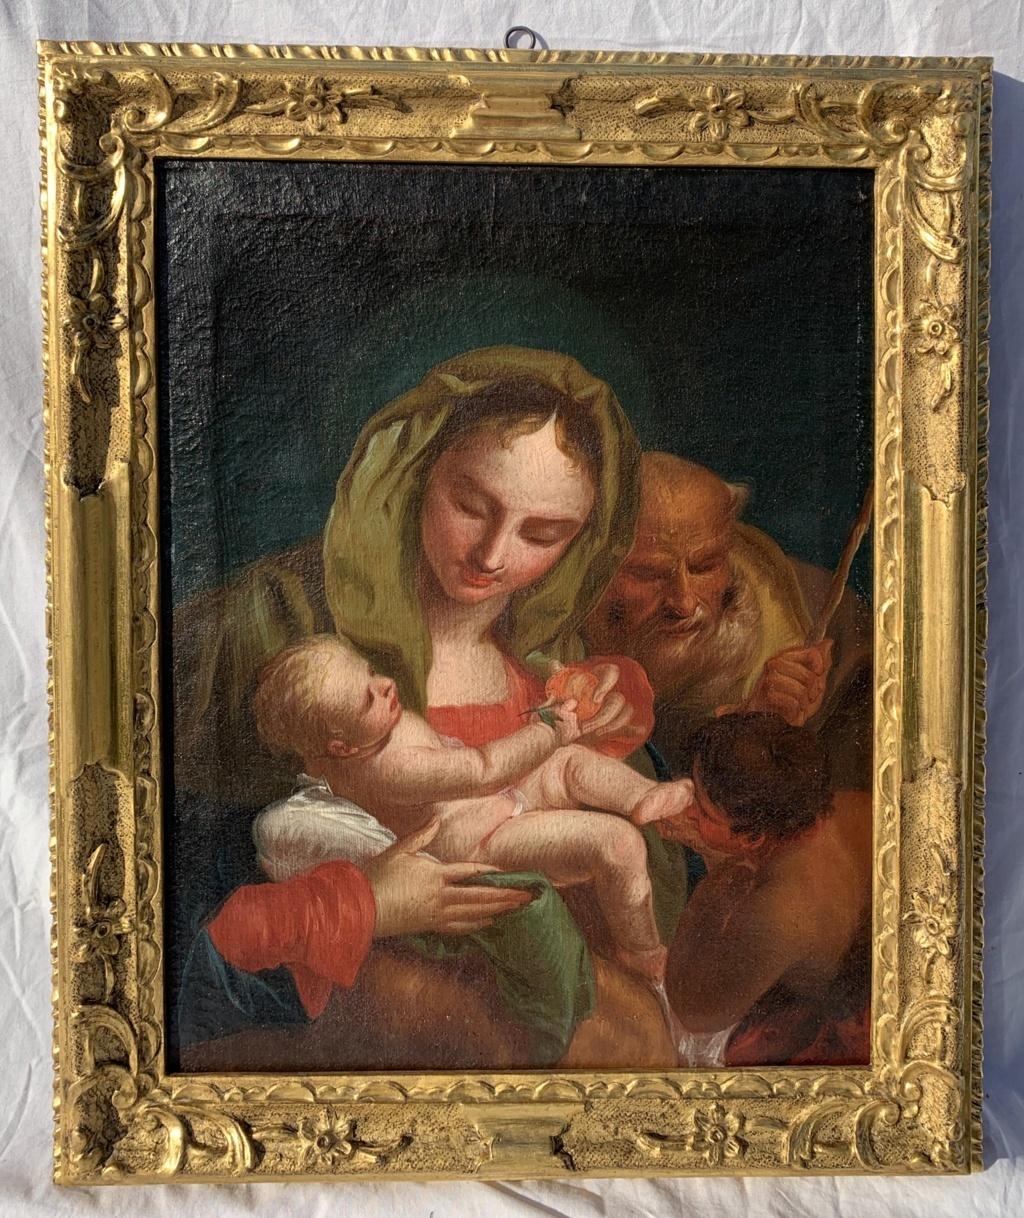 18th century Venetian figure painting - Virgin Child - Oil Canvas Tiepolo Venice - Painting by Unknown